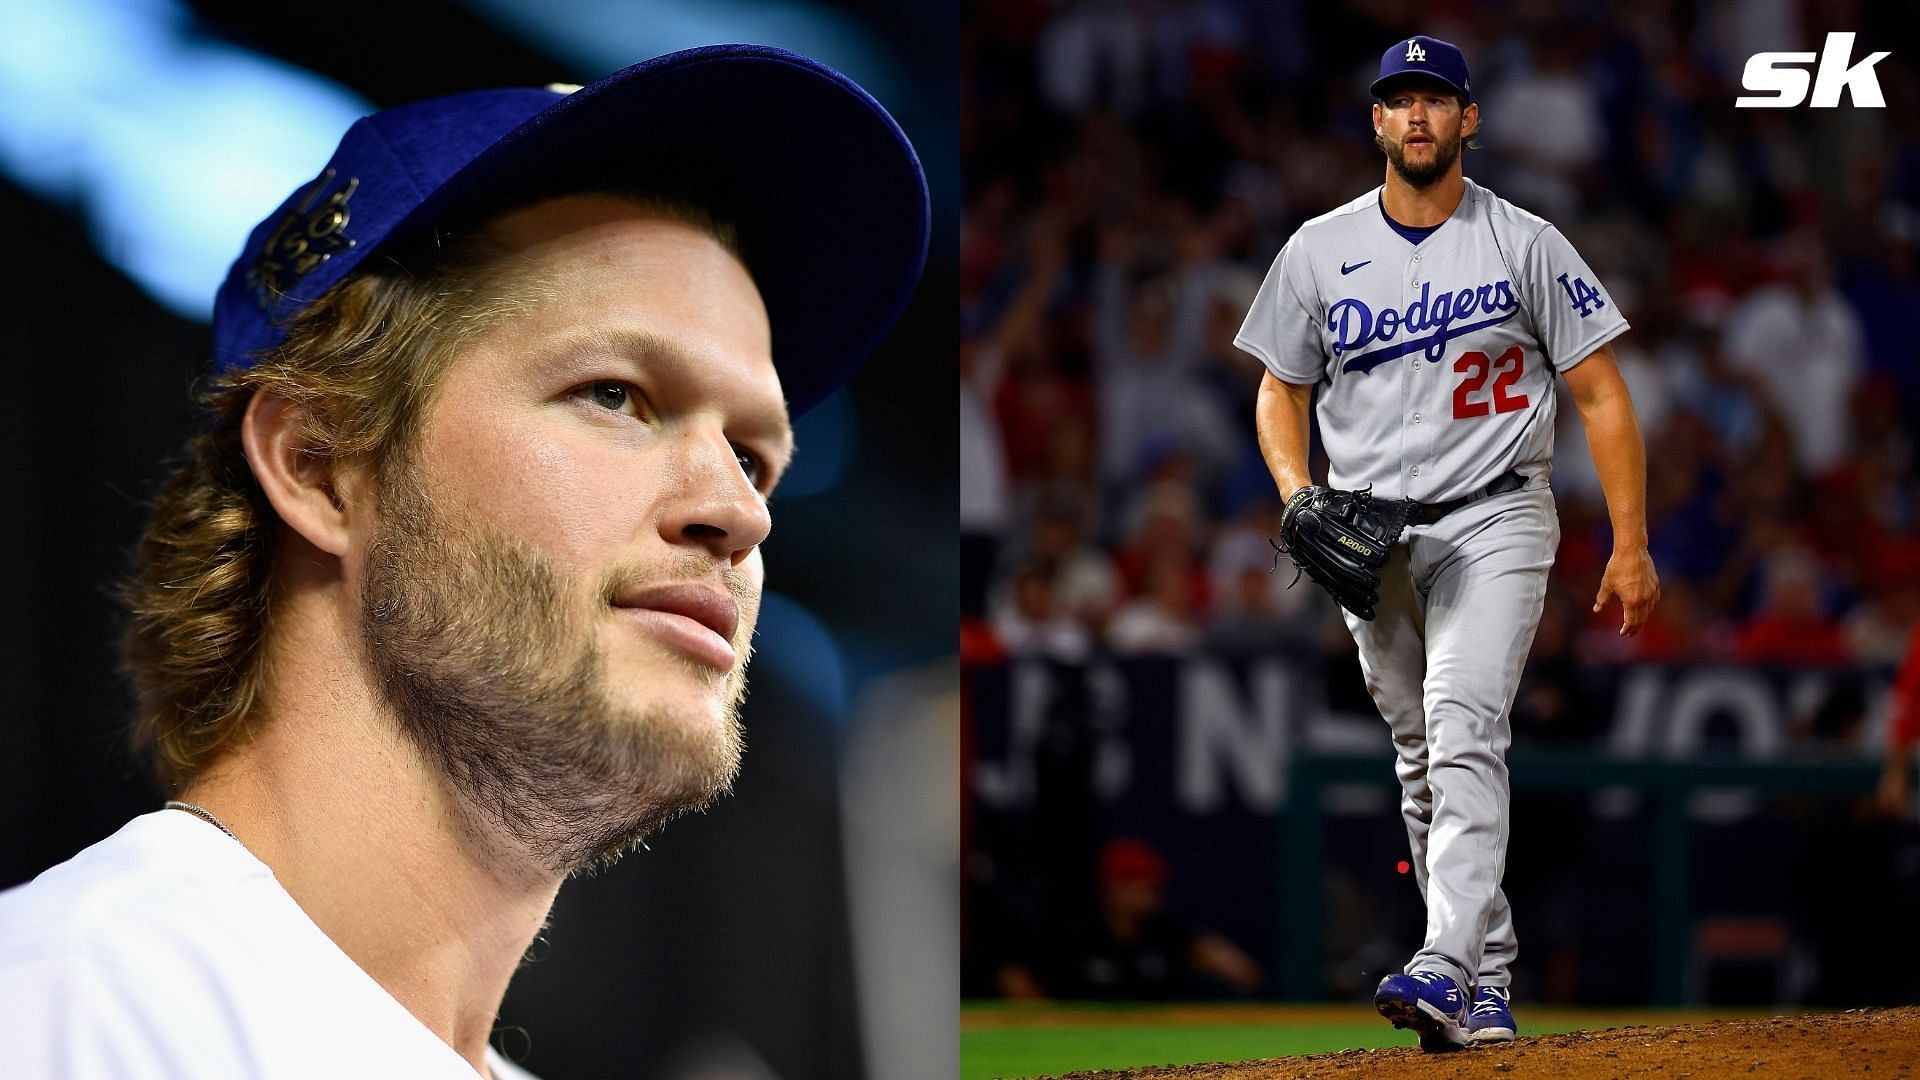 Future Hall of Famer Clayton Kershaw does not know what to attribute the spike in pitching injuries to